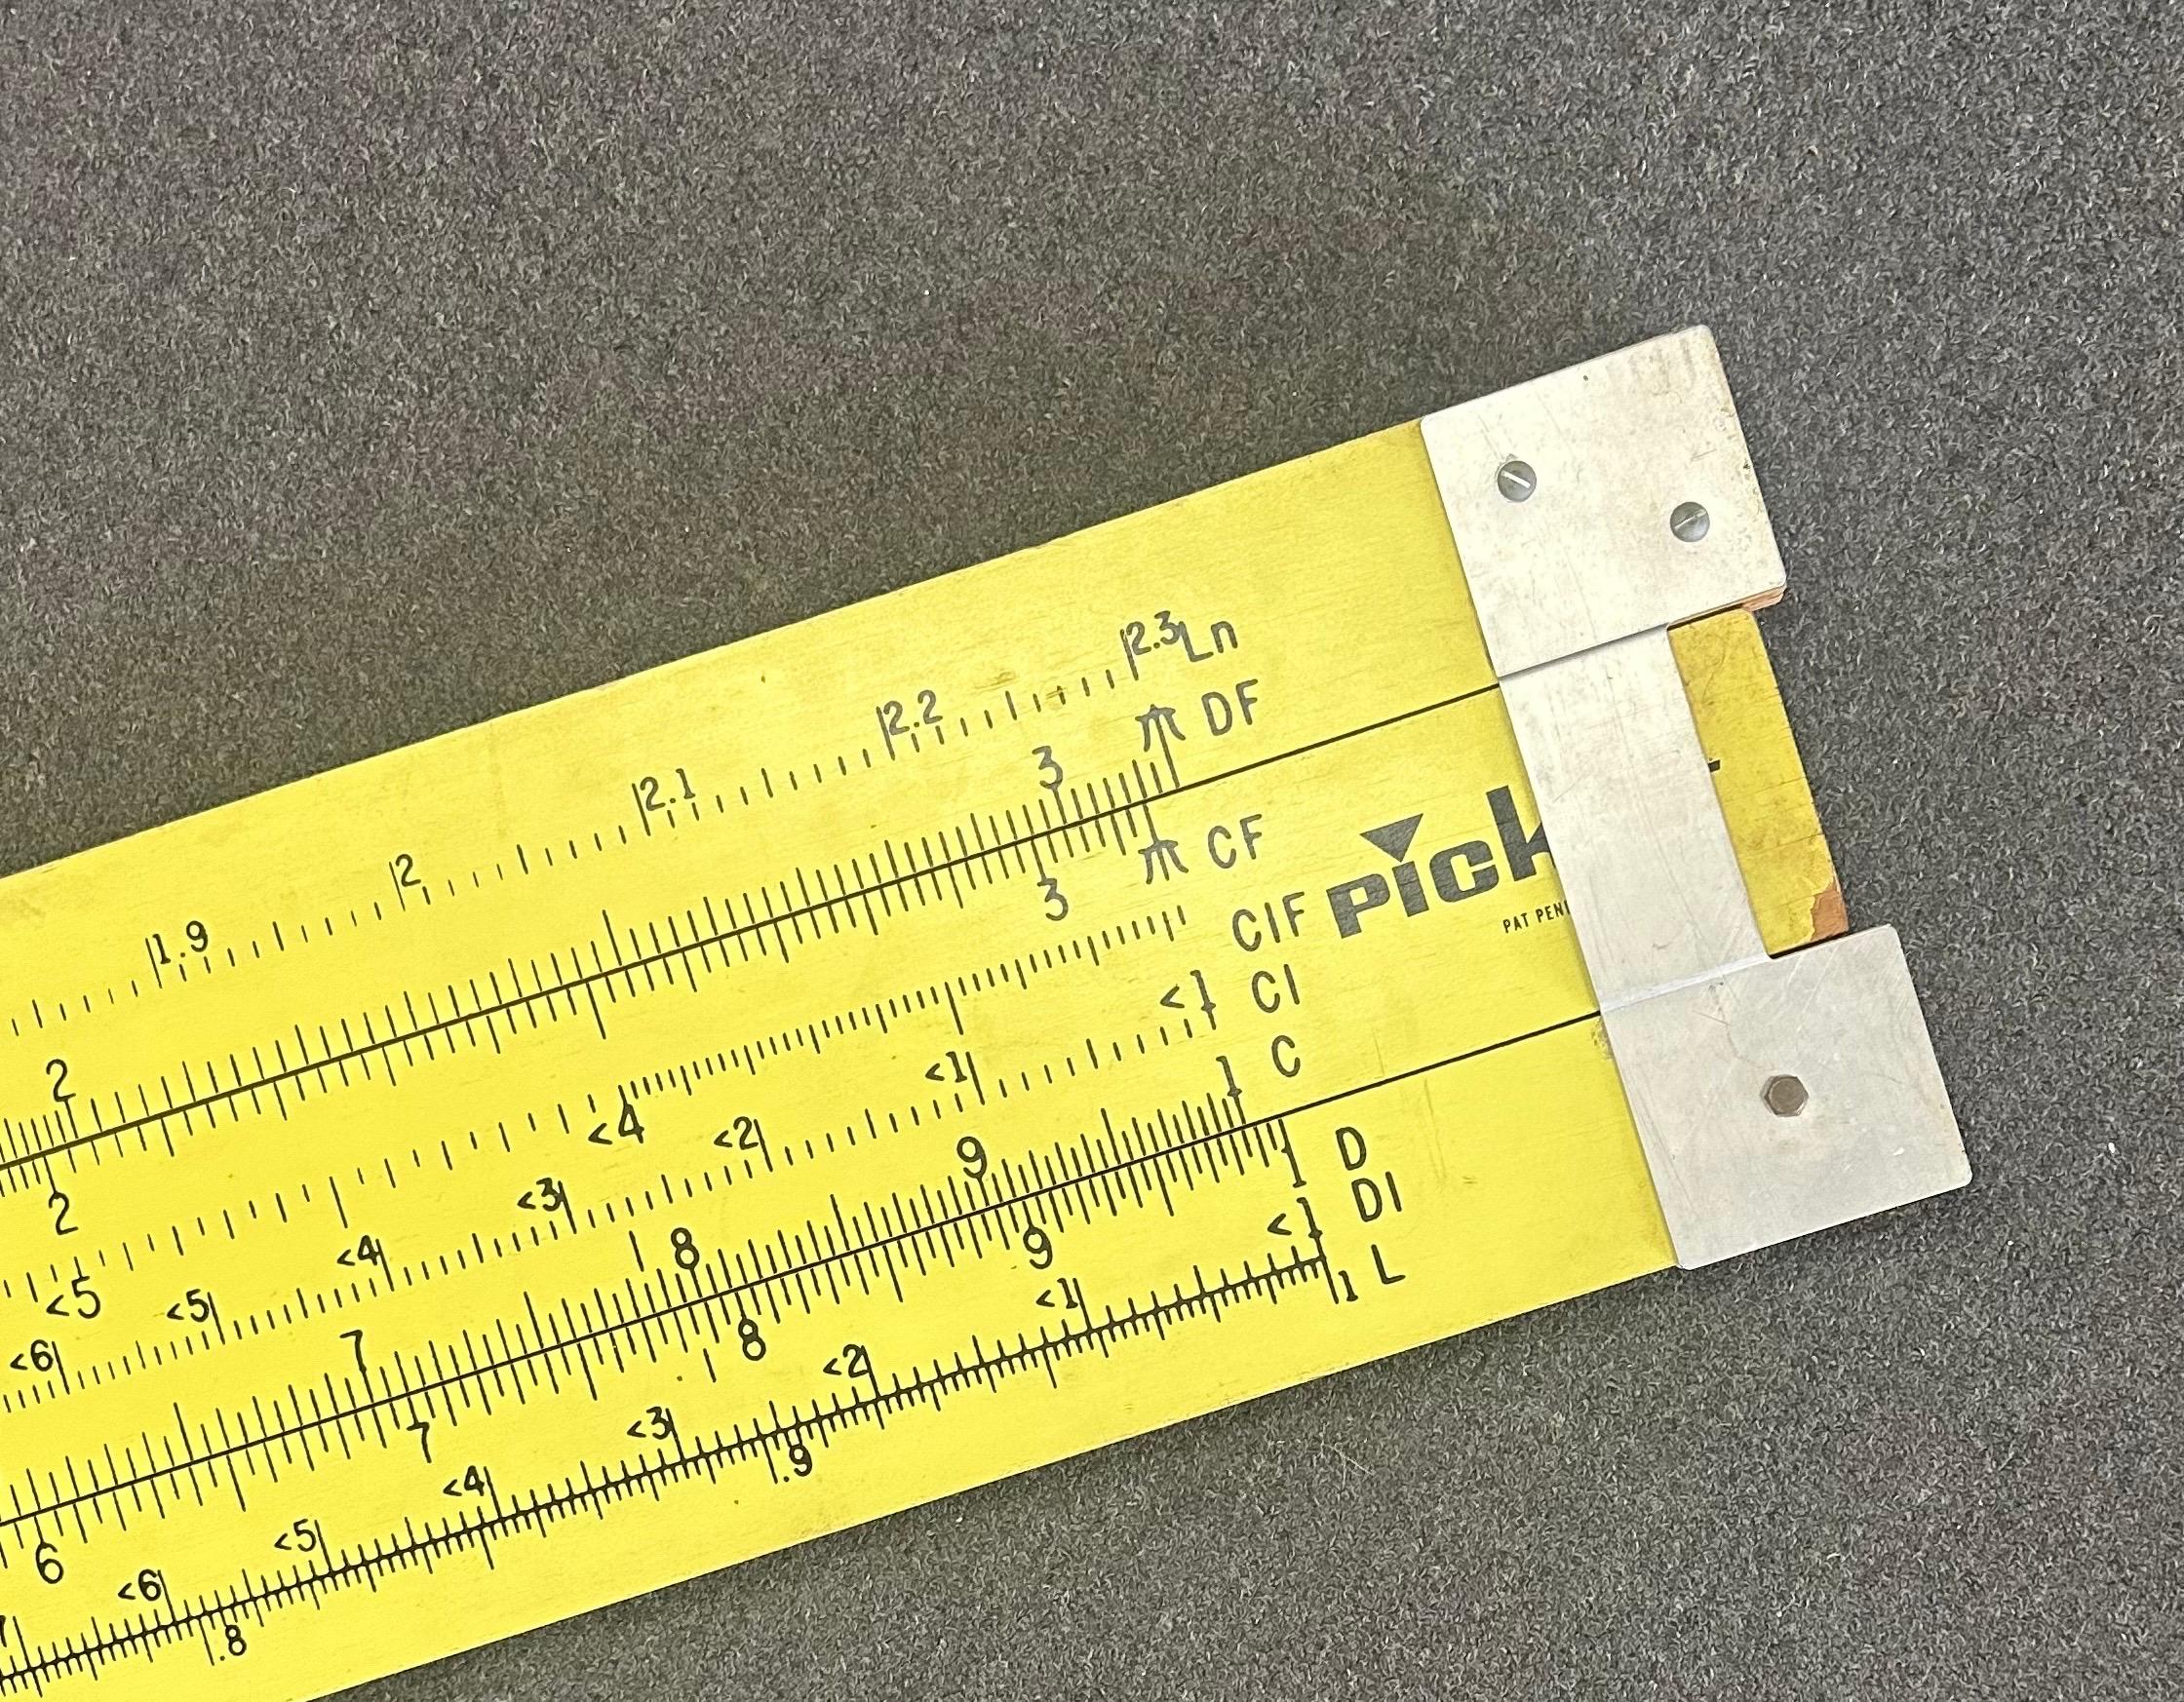 Unique Vintage Oversized 7' Industrial Slide Rule by Pickett In Good Condition For Sale In San Diego, CA